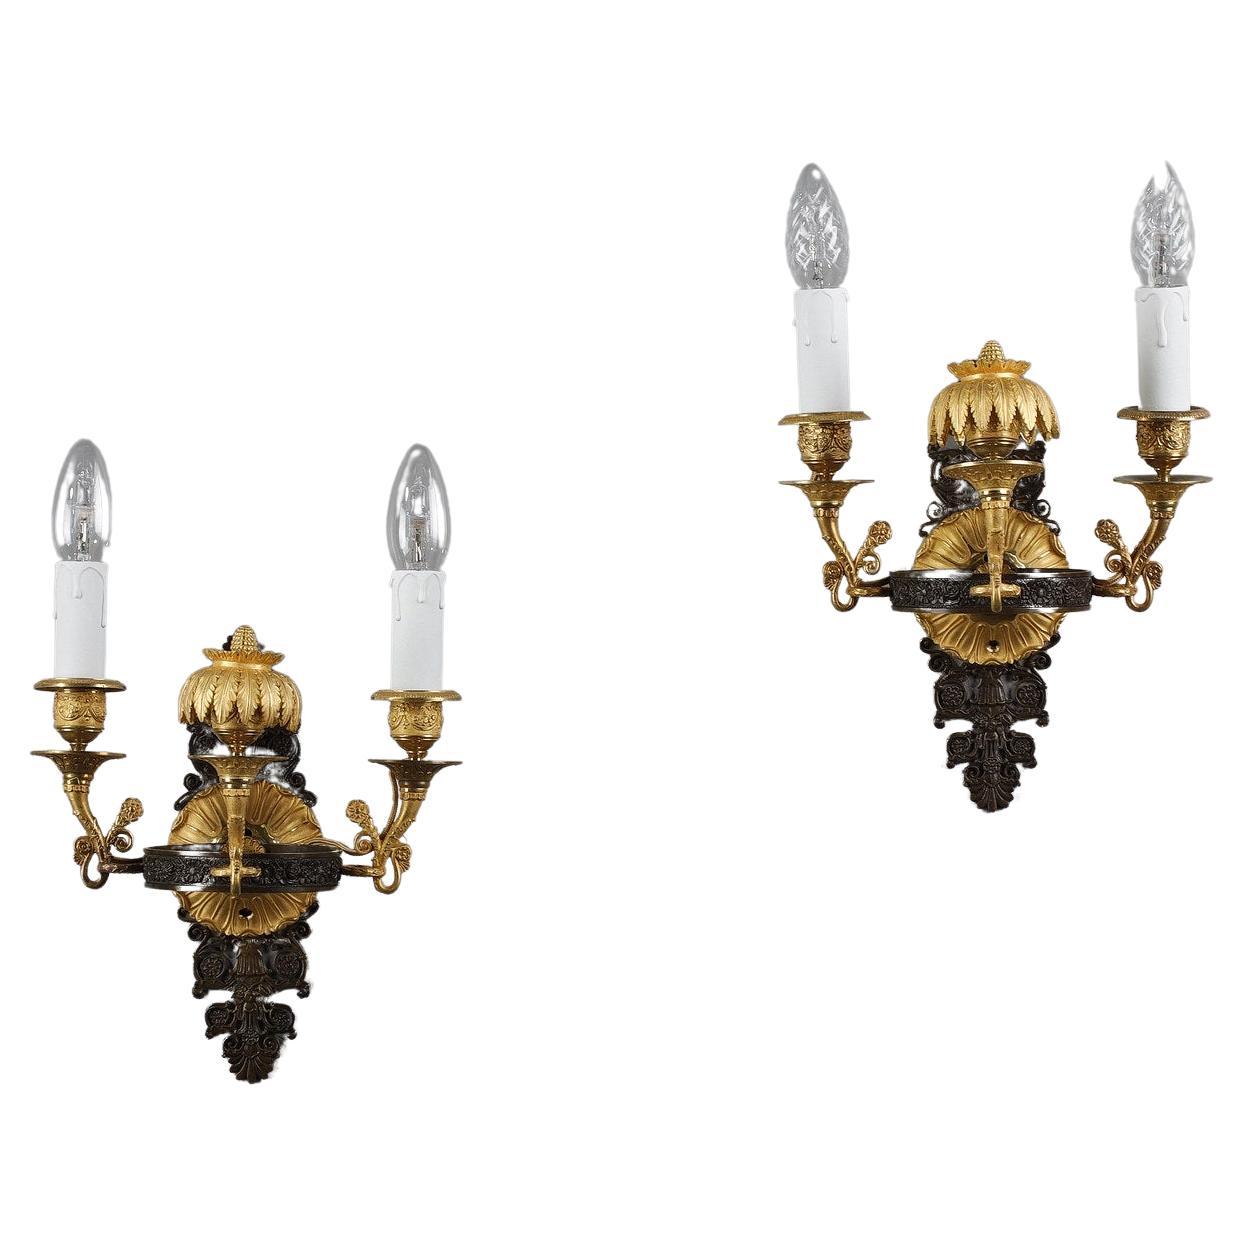 Pair of Sconces in Chiseled and Gilt Bronze, Charles X Period